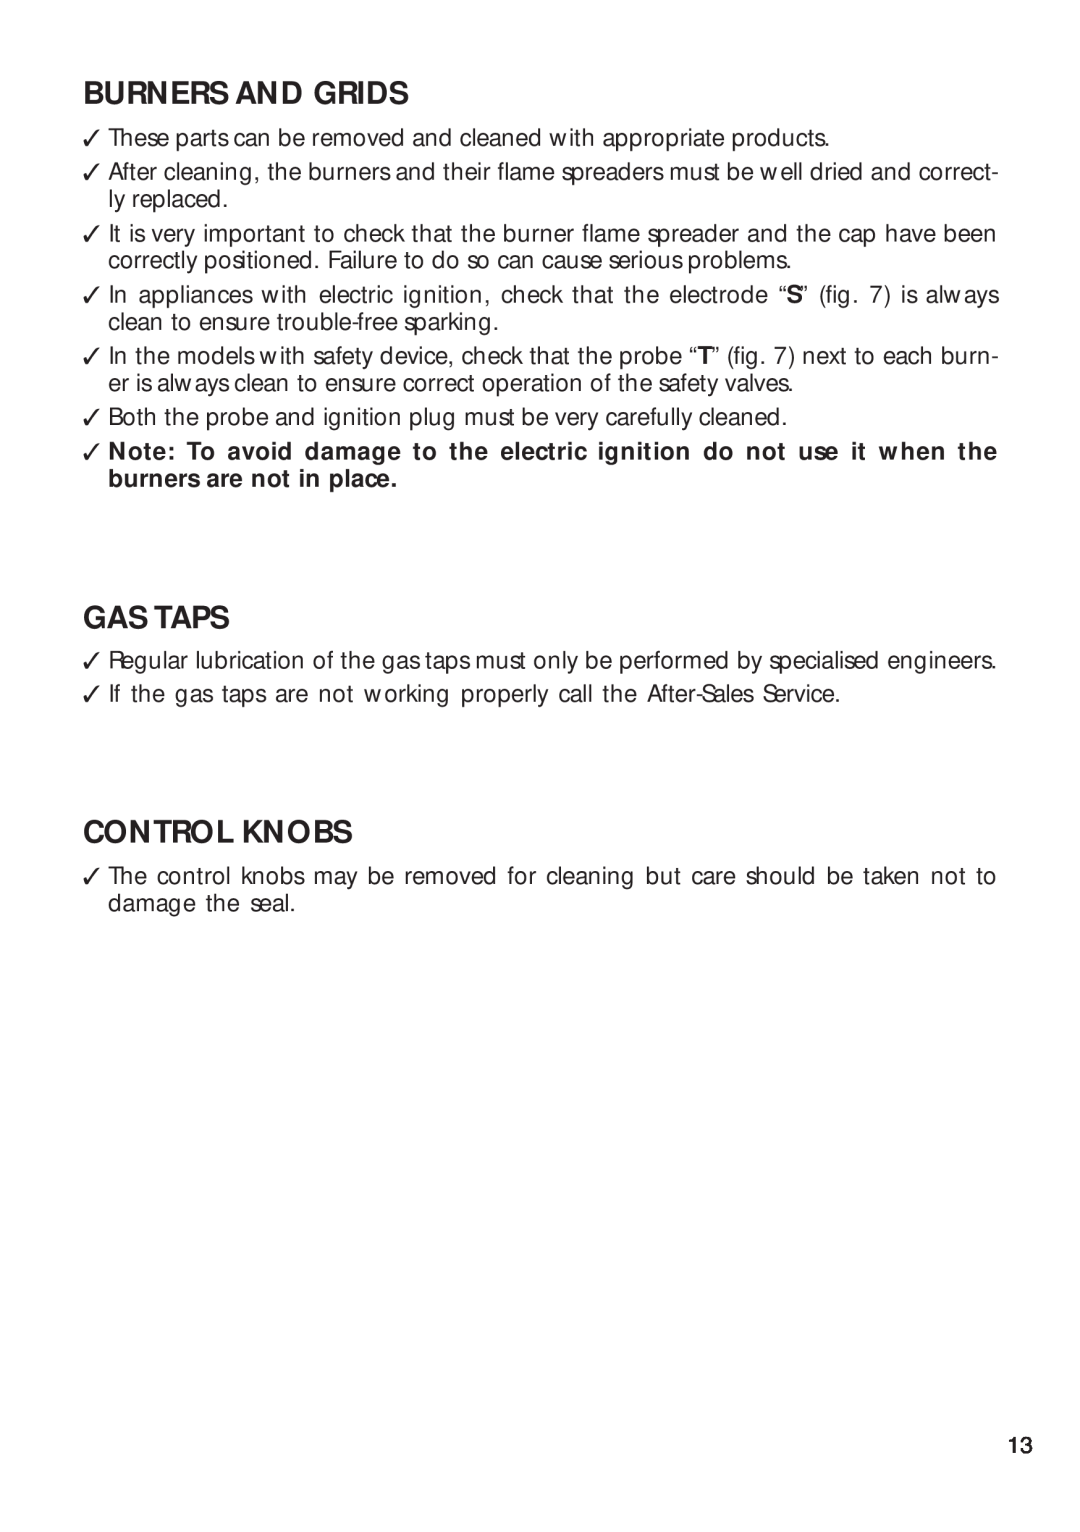 CDA HCG 730, HCG 740 installation instructions Burners And Grids, Gas Taps, Control Knobs 